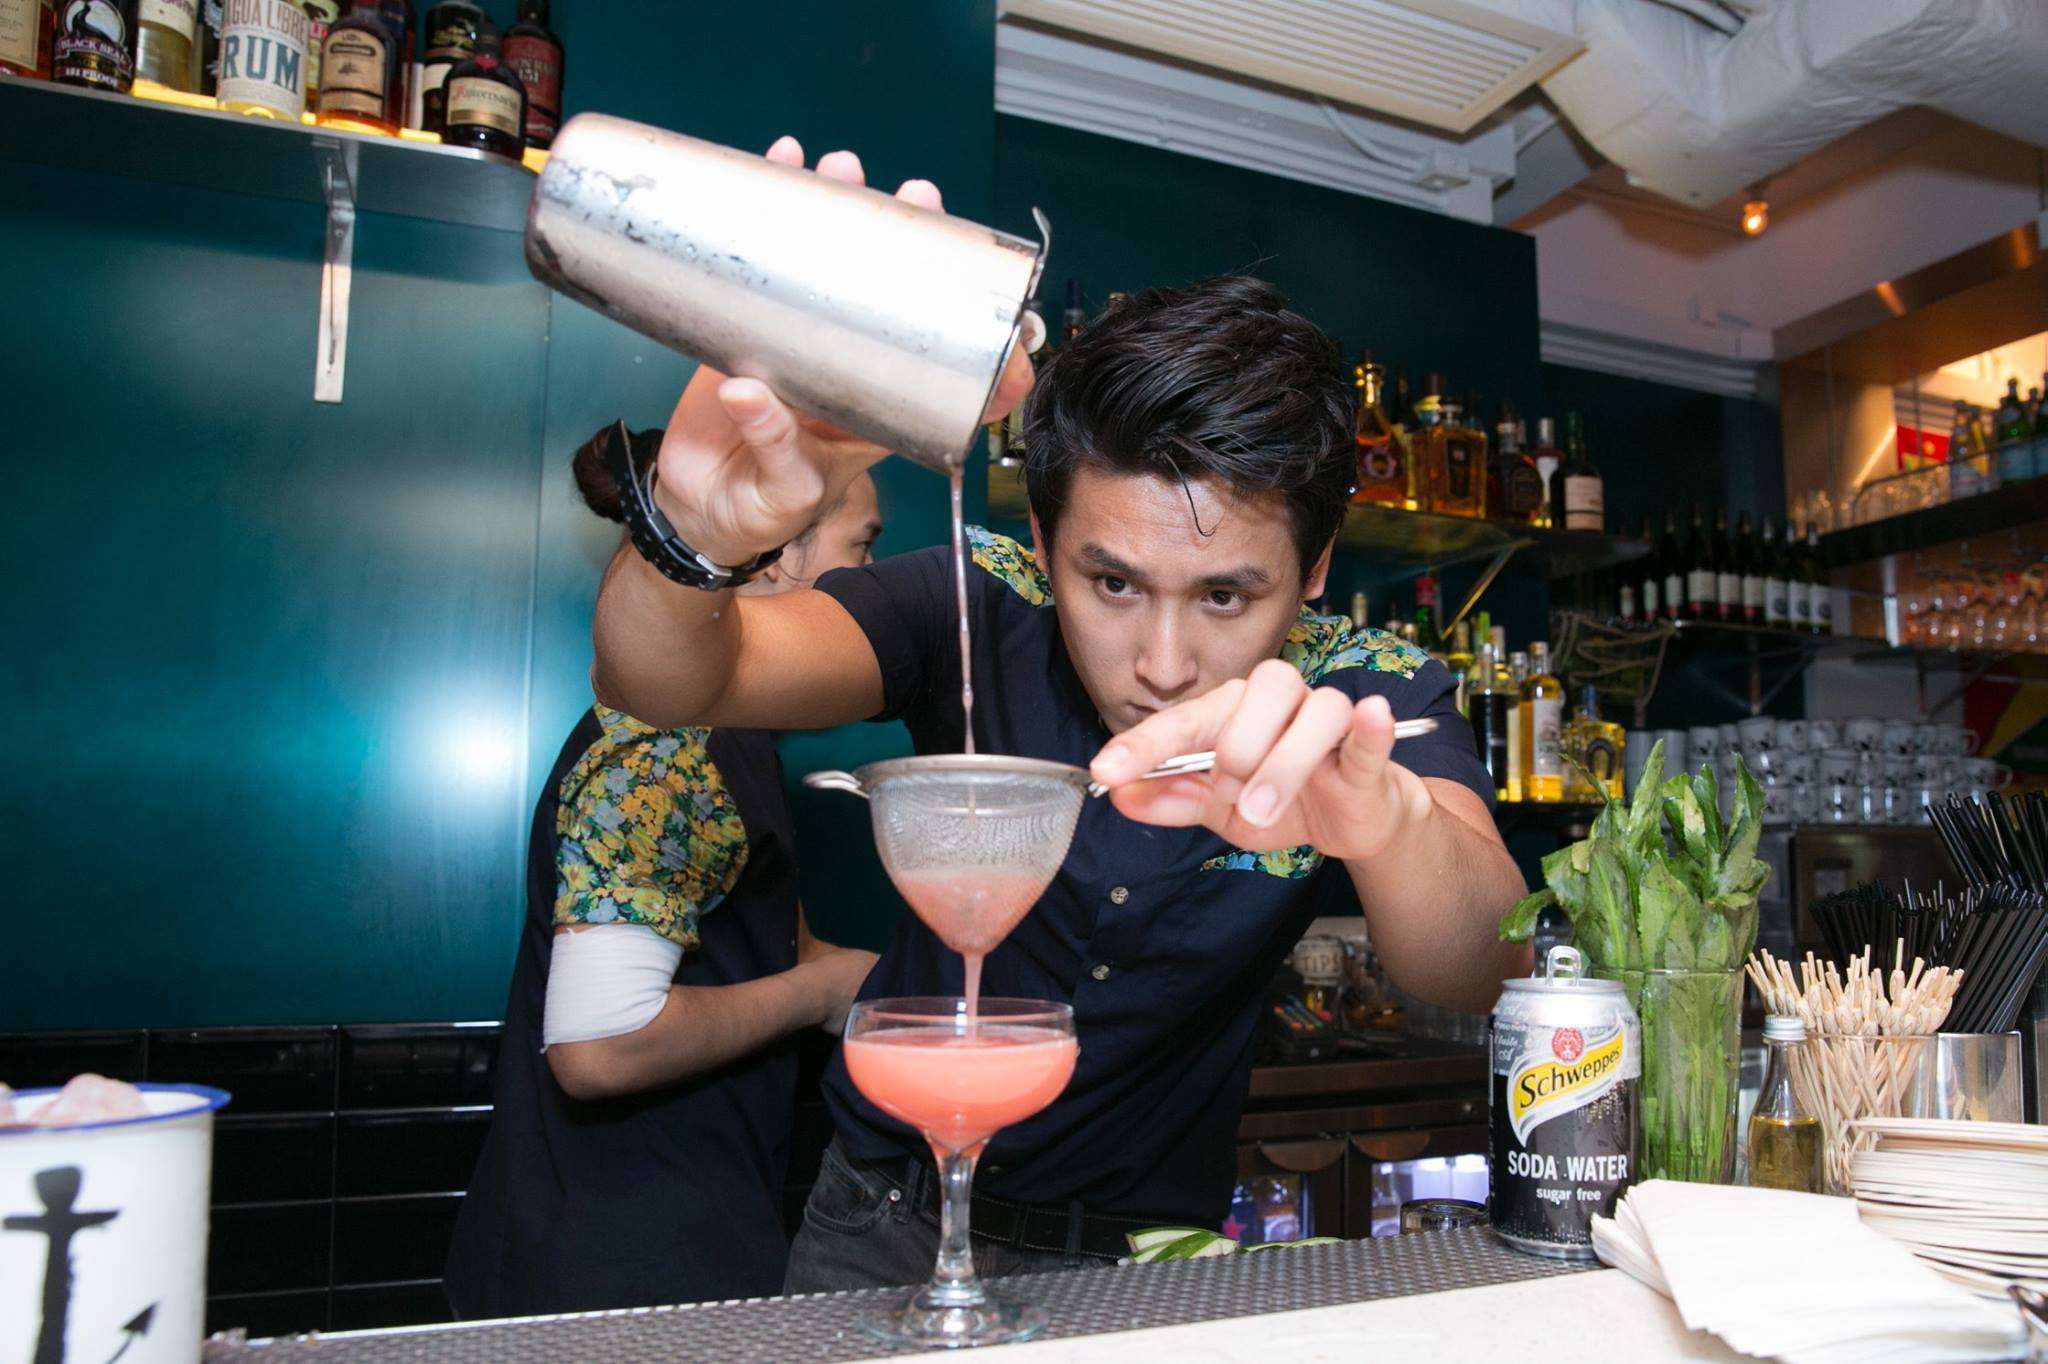 A bartender mixes drinks at Rummin' Tings on Hollywood Road in Central.